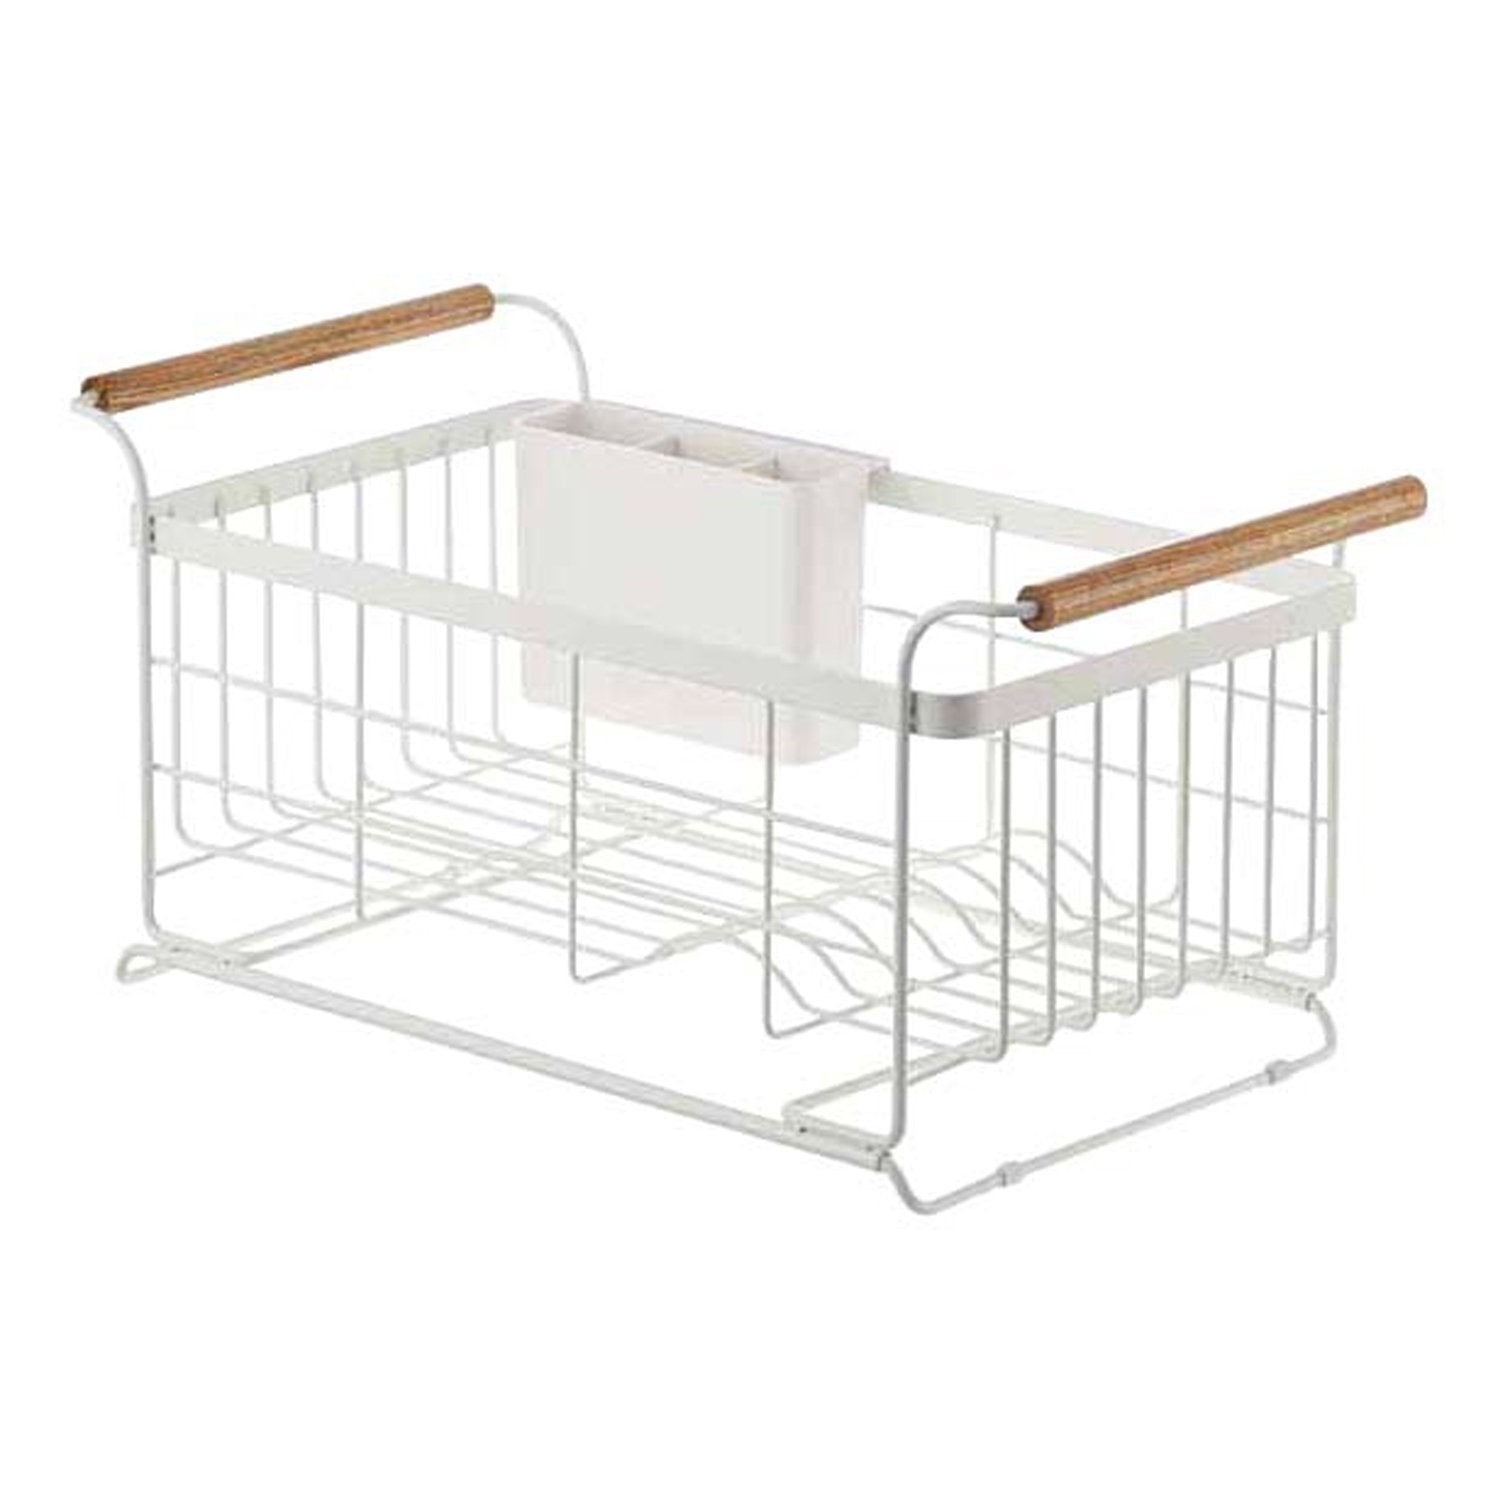 Tosca Over-the-Sink Dish Rack - White